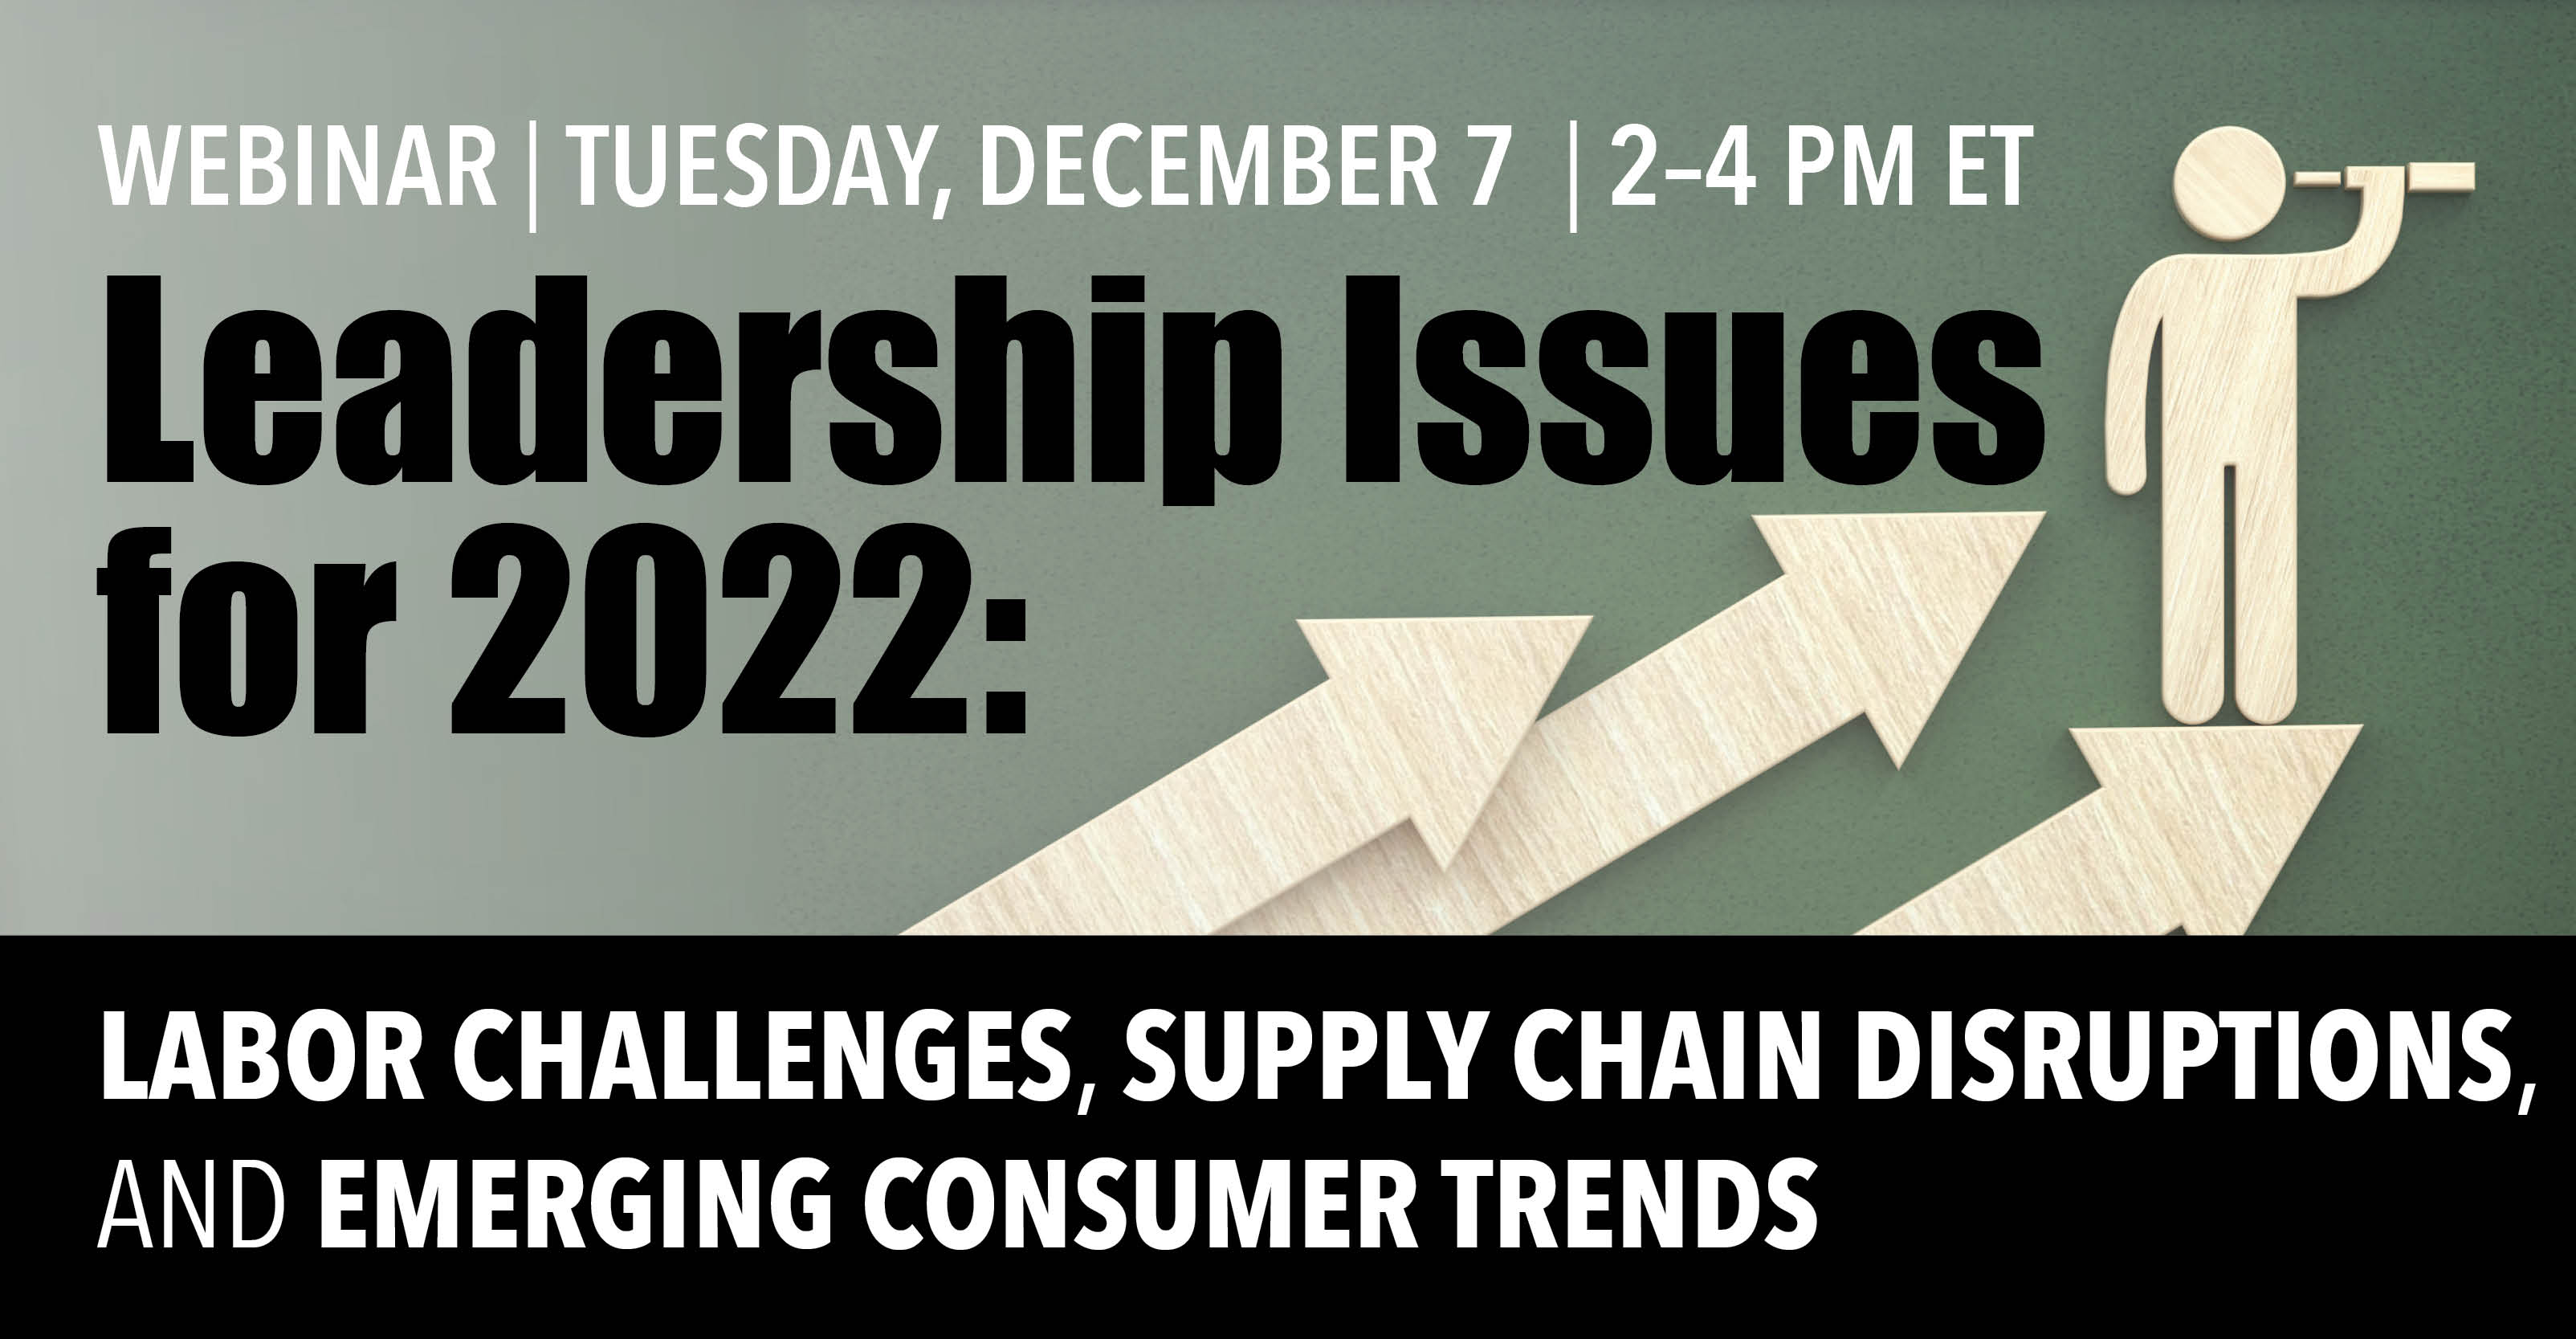 Leadership issues for 2022: Labor challenges, supply chain disruptions and emerging consumer trends